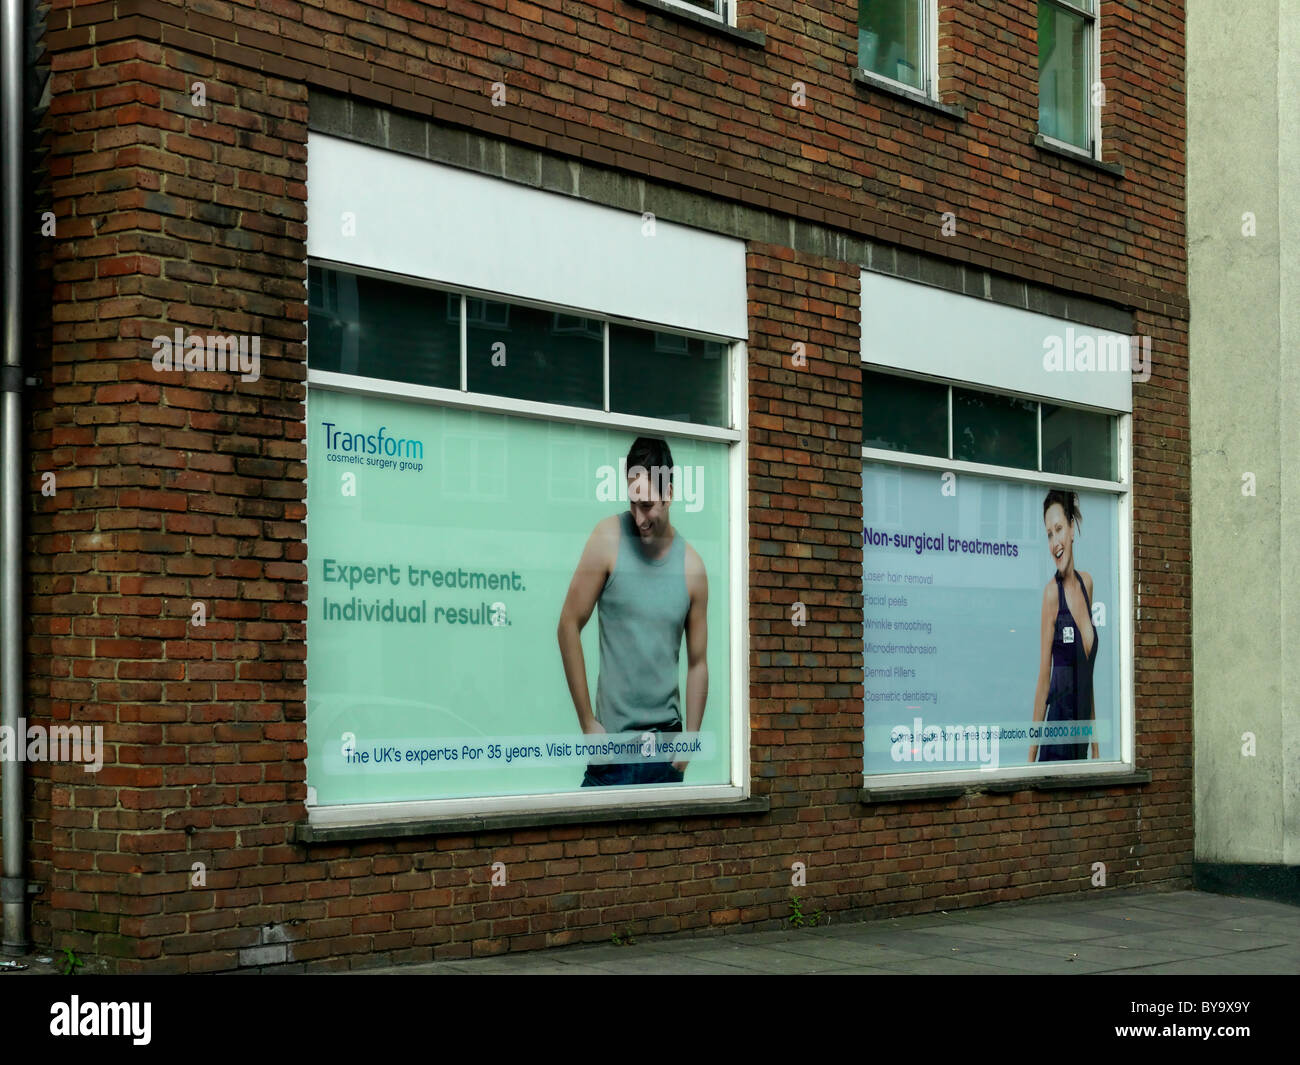 Adverts In Windows Advertising Transform Cosmetic Surgery Group England Stock Photo